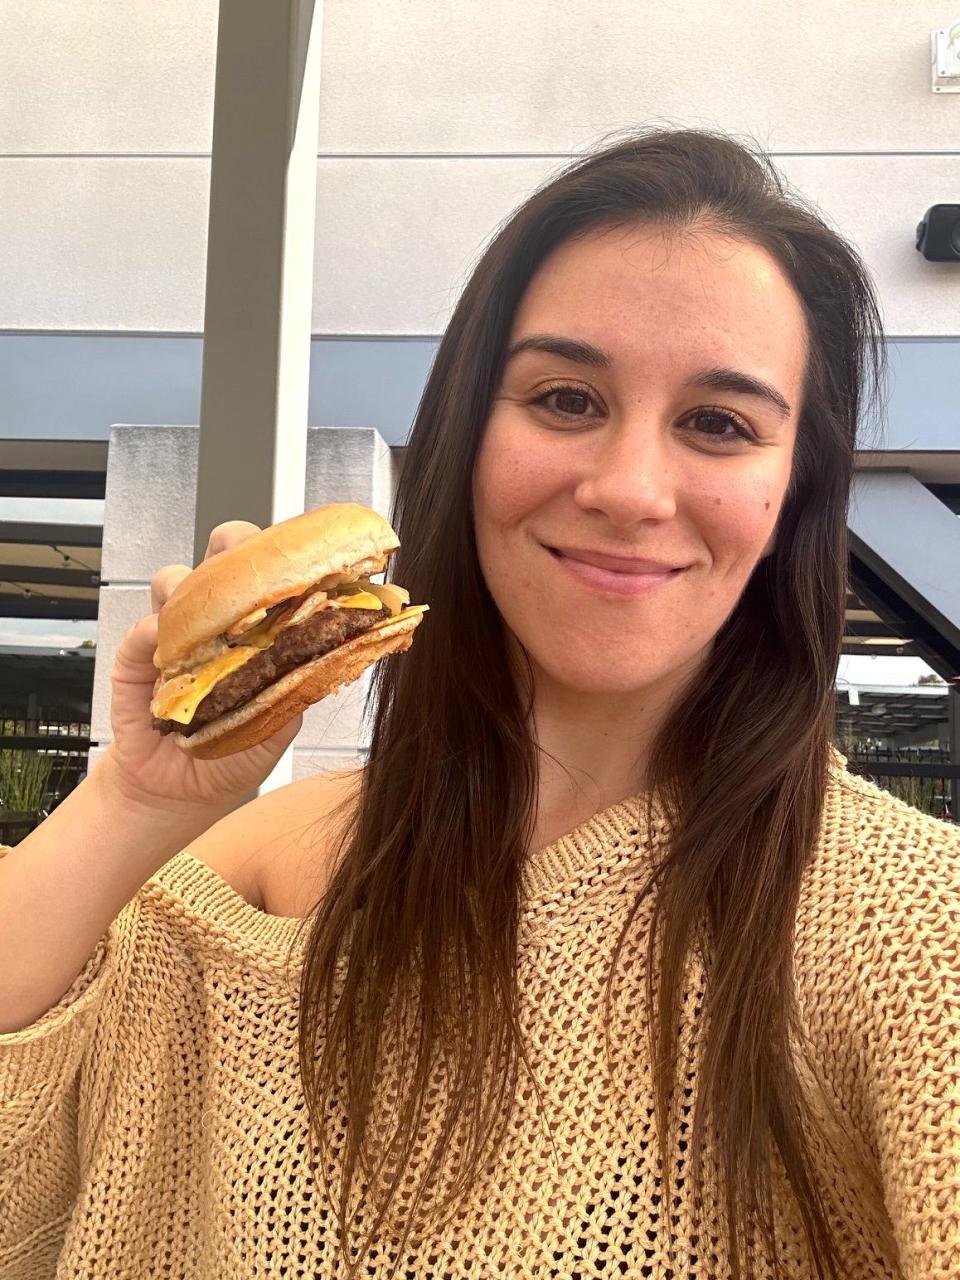 Anneta with Smashed Jack burger at Jack in the Box